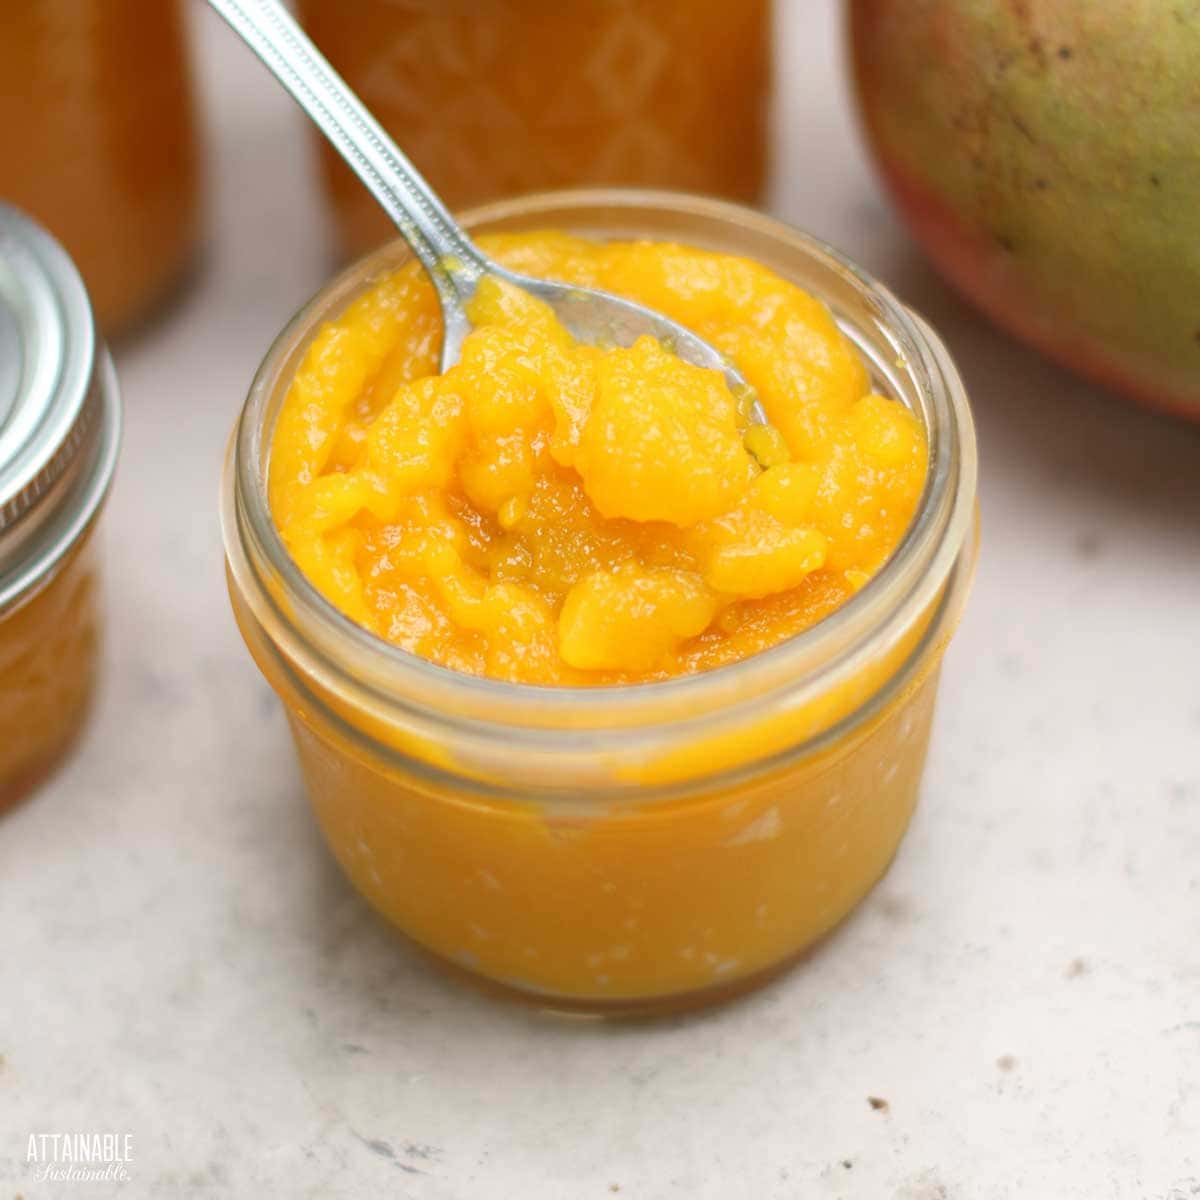 jars of mango jam, one open with a spoon in it.